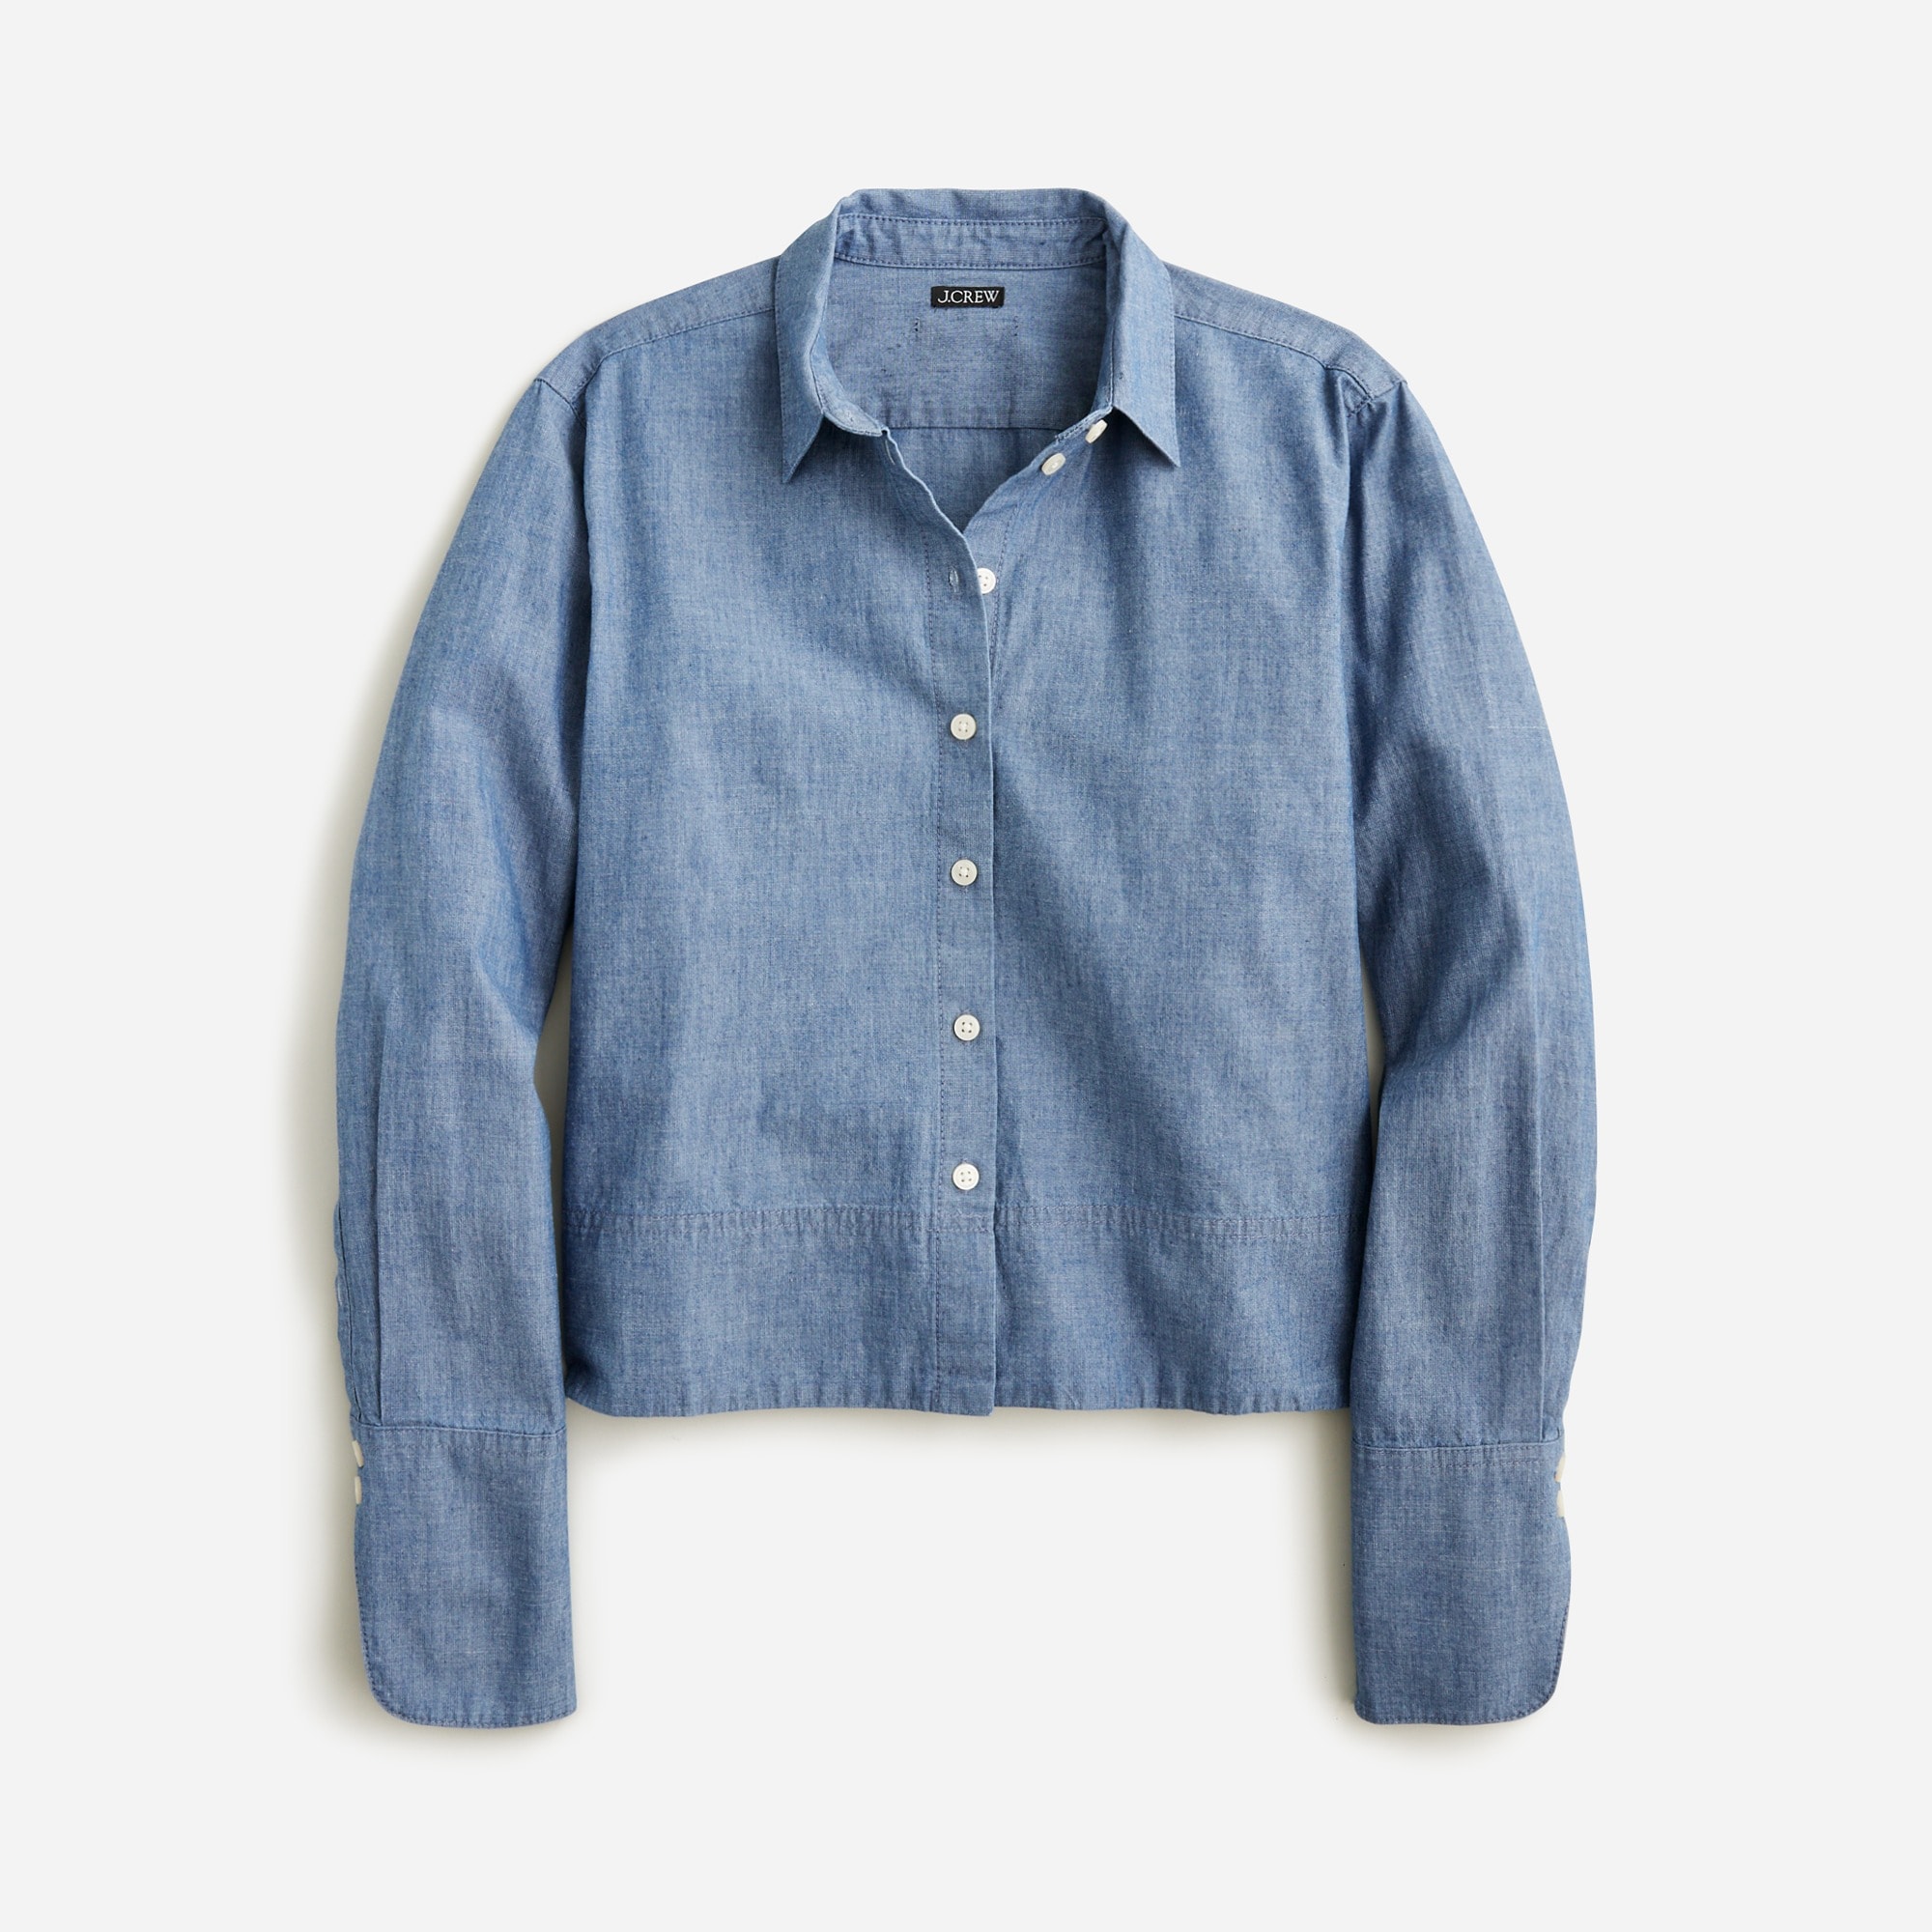  Cropped gar&ccedil;on shirt in chambray